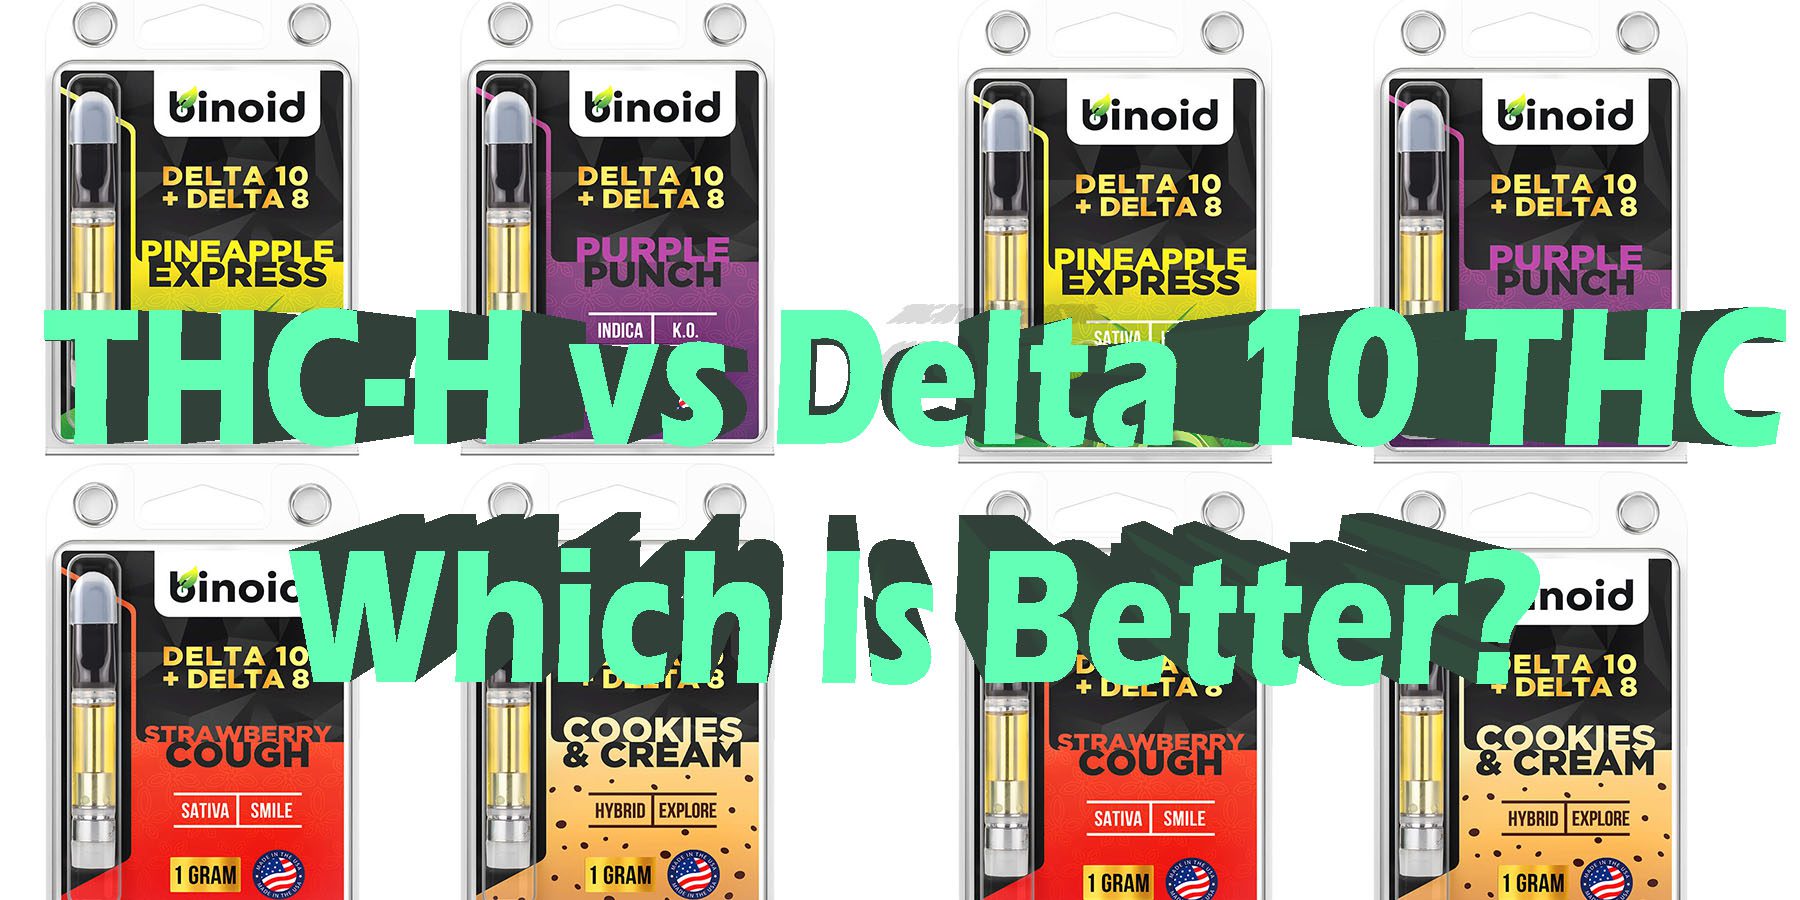 THC H vs Delta 10 THC Which Is Better HowToGetNearMe BestPlace LowestPrice Coupon Discount For Smoking Best Brand D9 D8 THCA Indoor Good Binoid